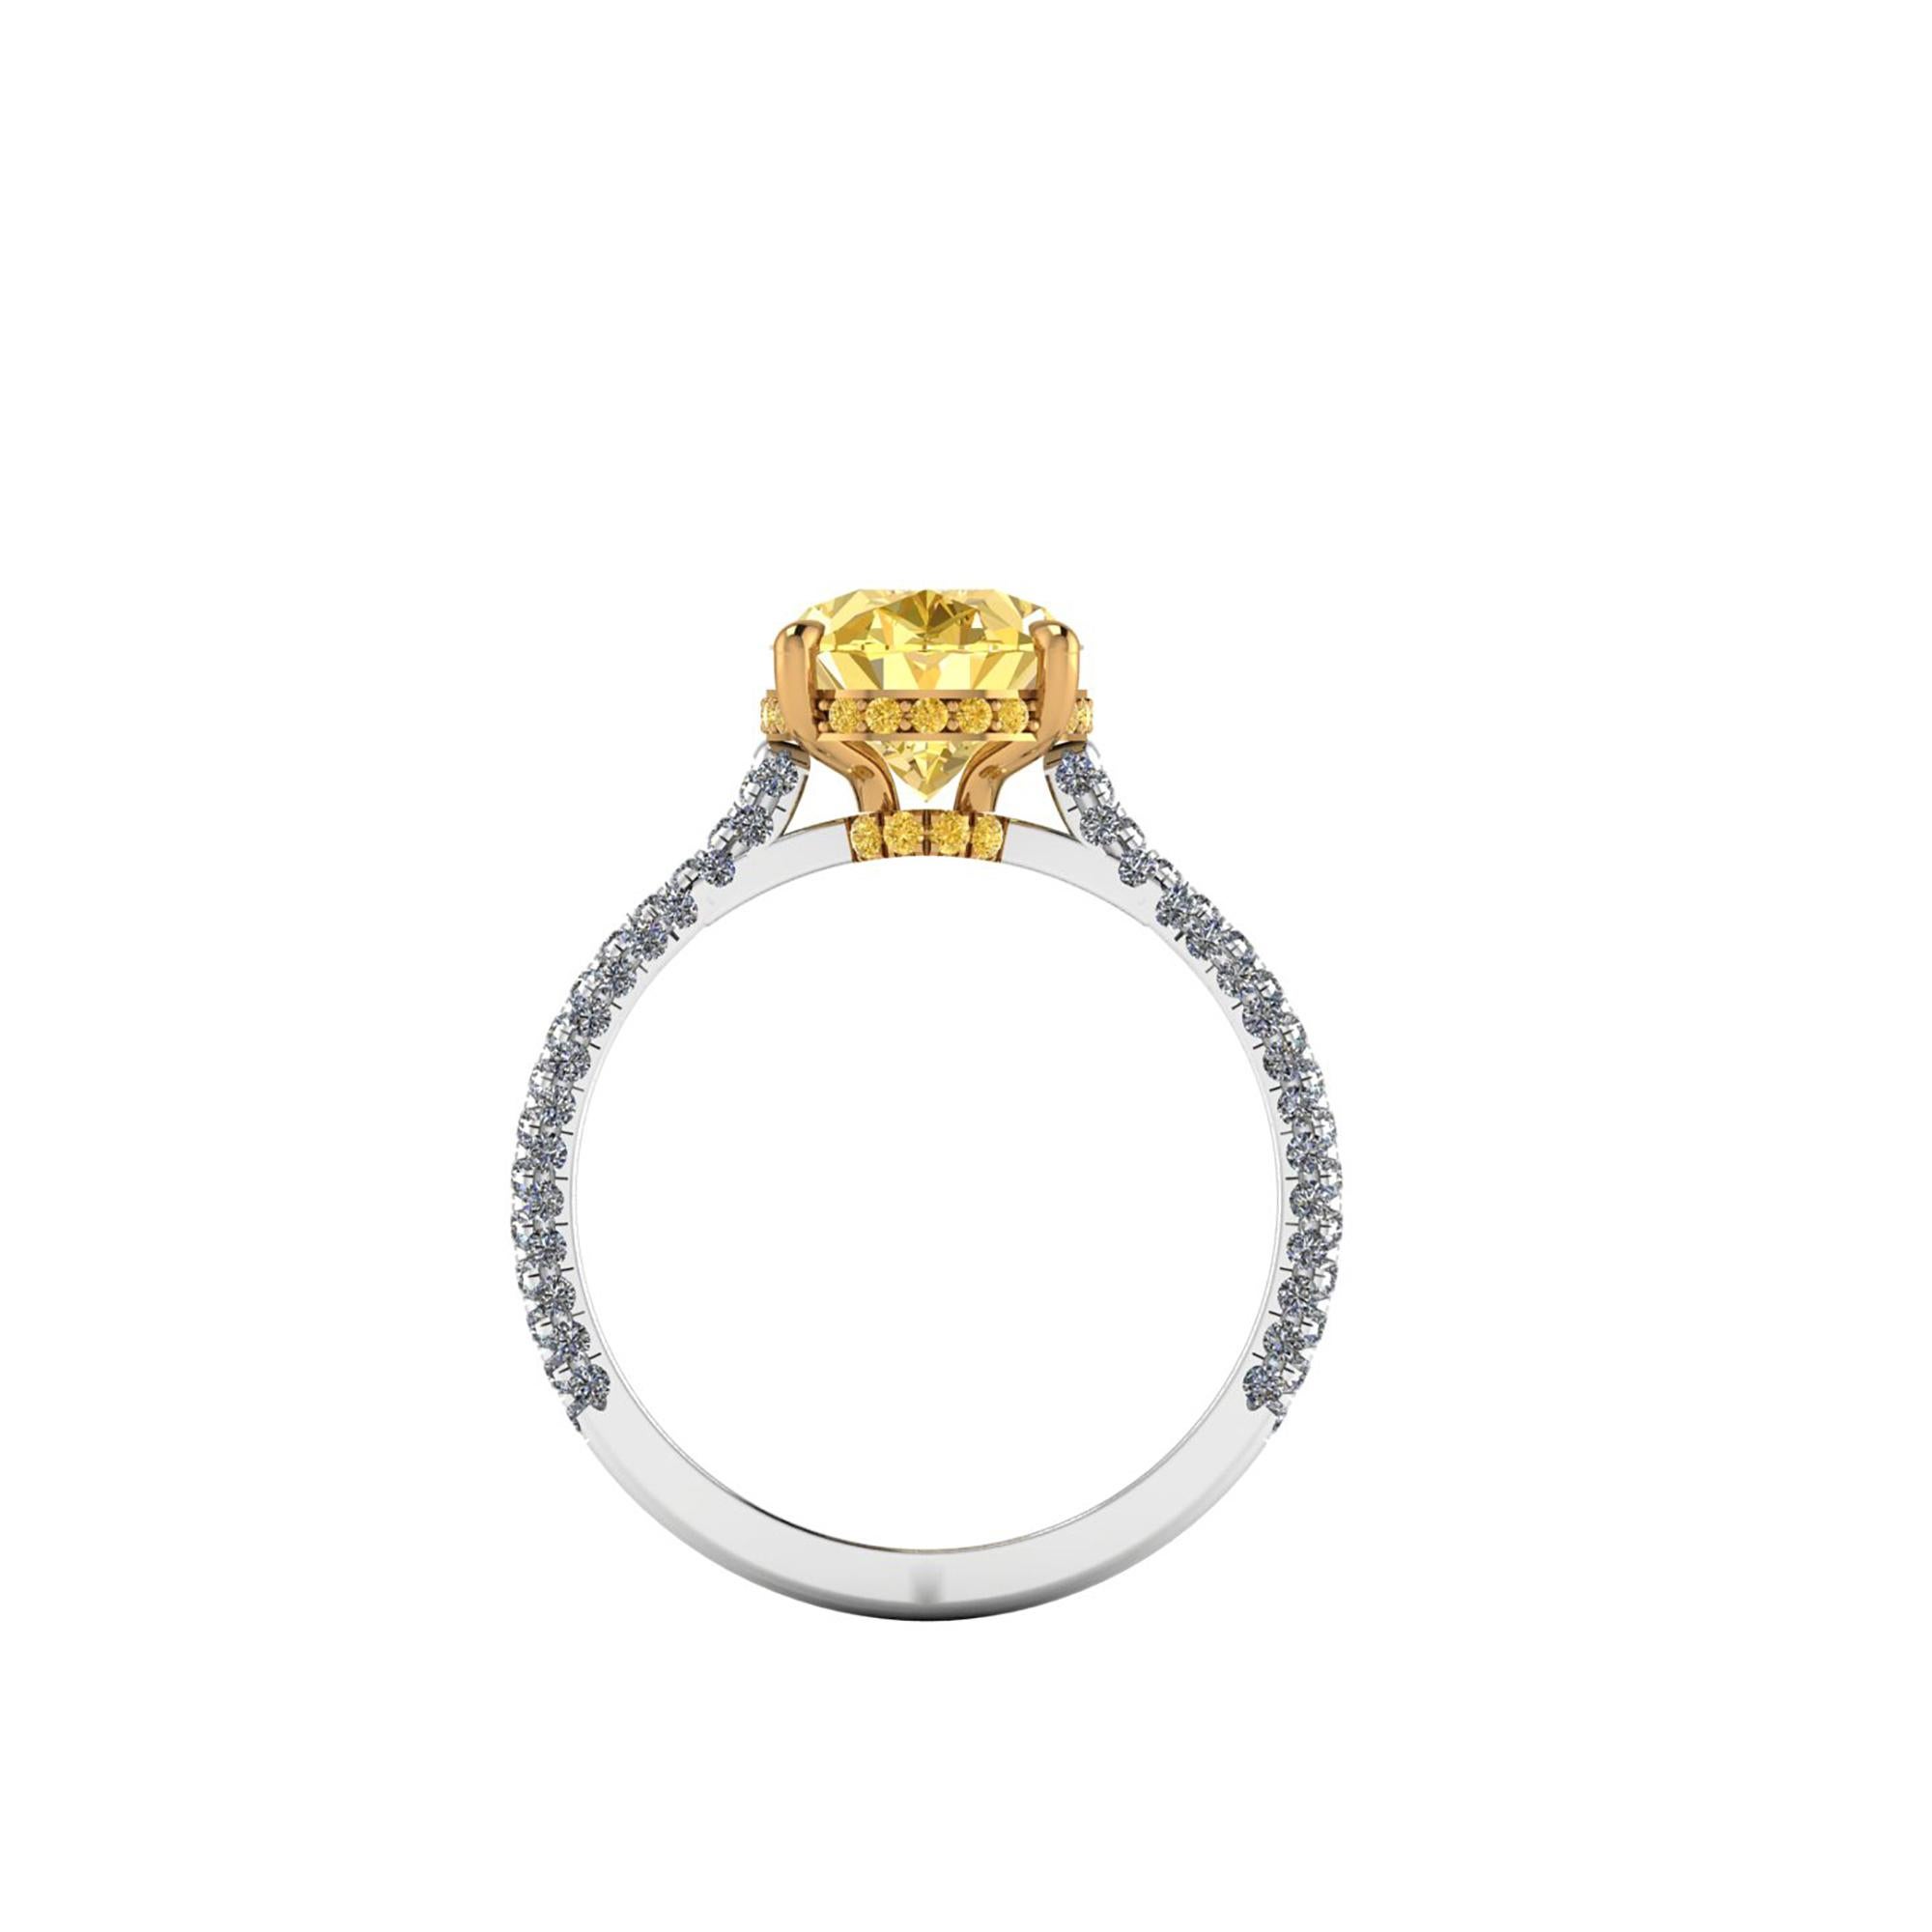 A very rare diamond in color and beauty, GIA Certified 3.06 carat Oval Vivid Intense Yellow diamond with No Fluorescence, a rare and valuable diamond, set on a Platinum 950 and 18k Yellow gold ring, designed and hand made in New York adorned by